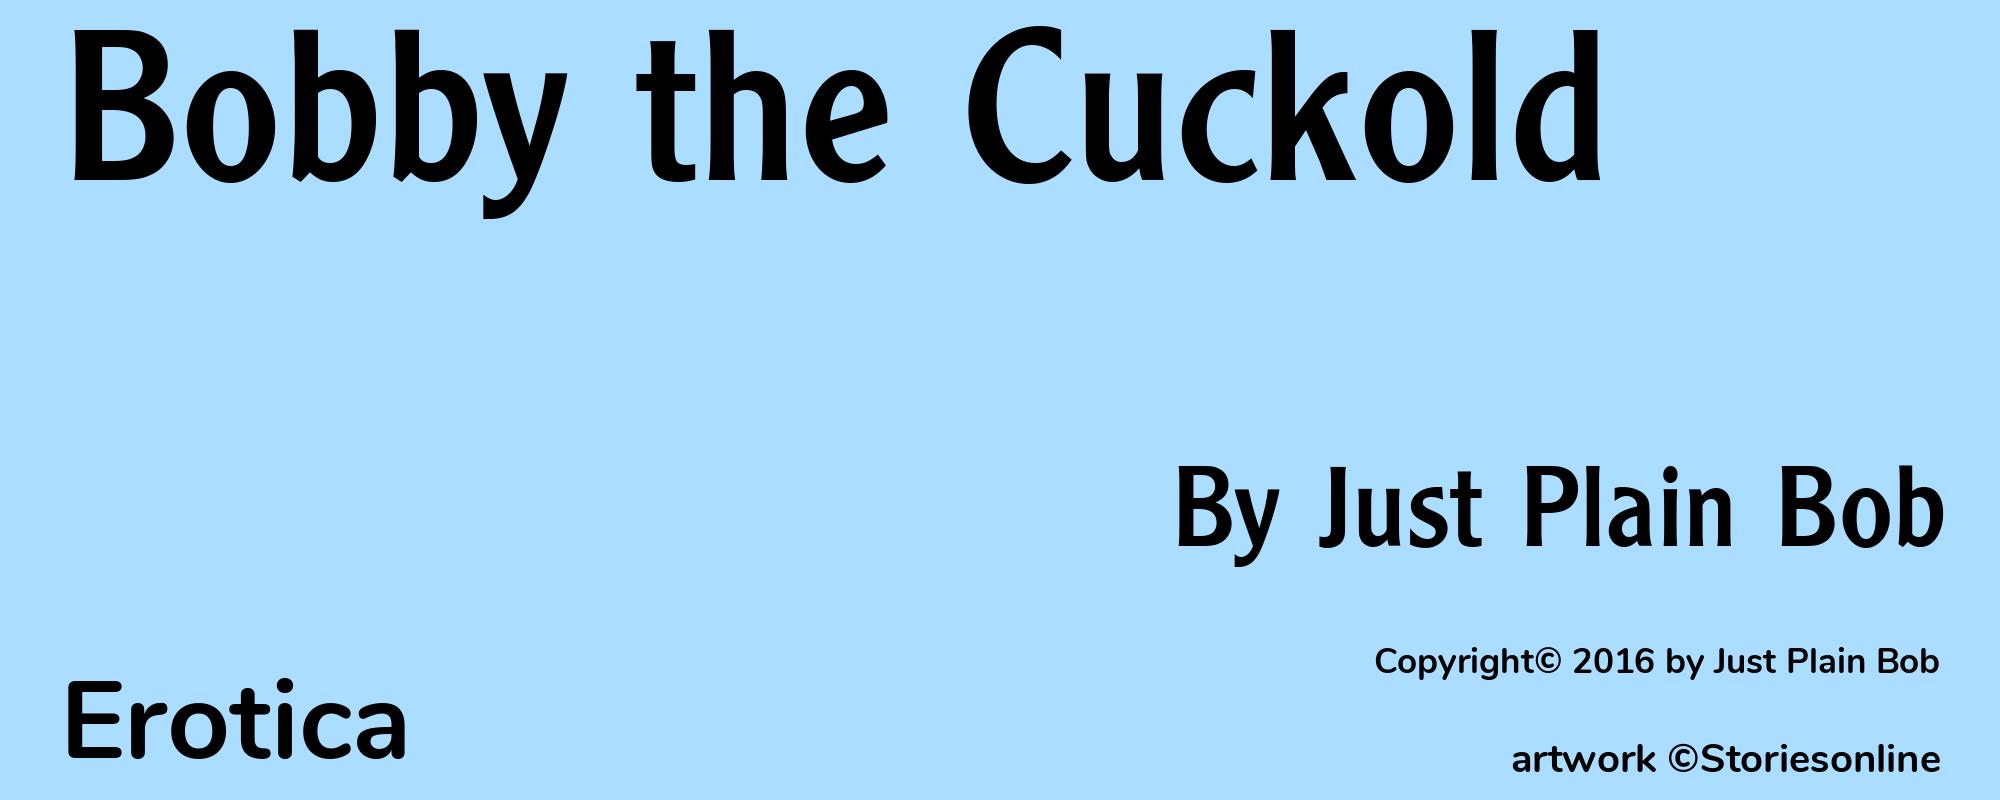 Bobby the Cuckold - Cover